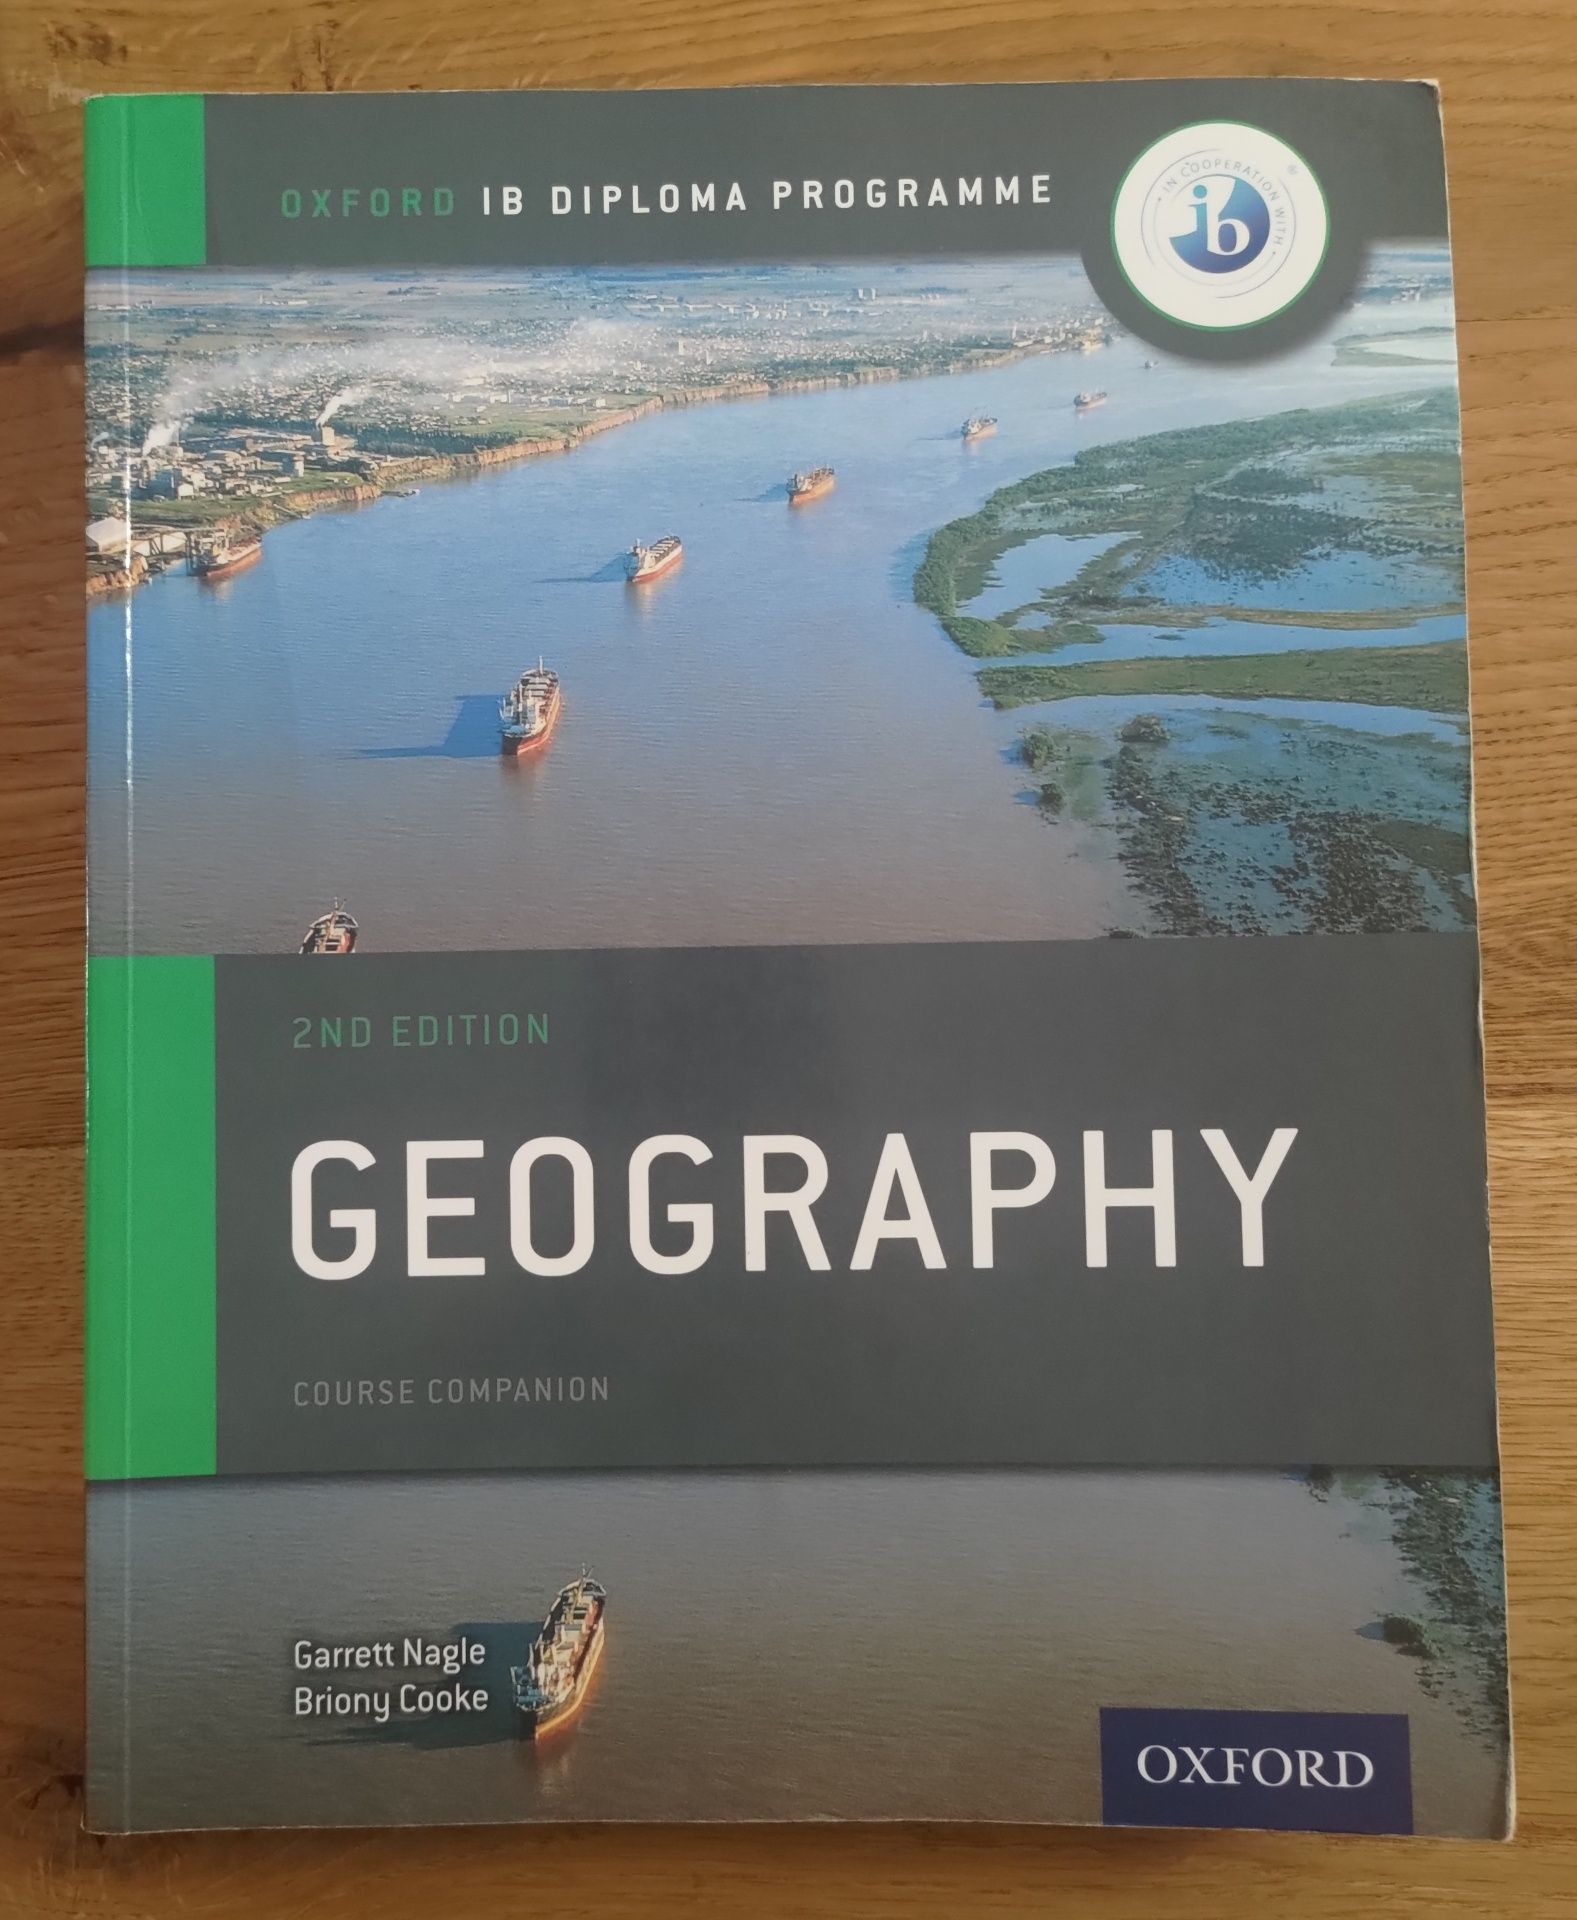 IB Diploma Programme - Oxford Geography 2nd Edition